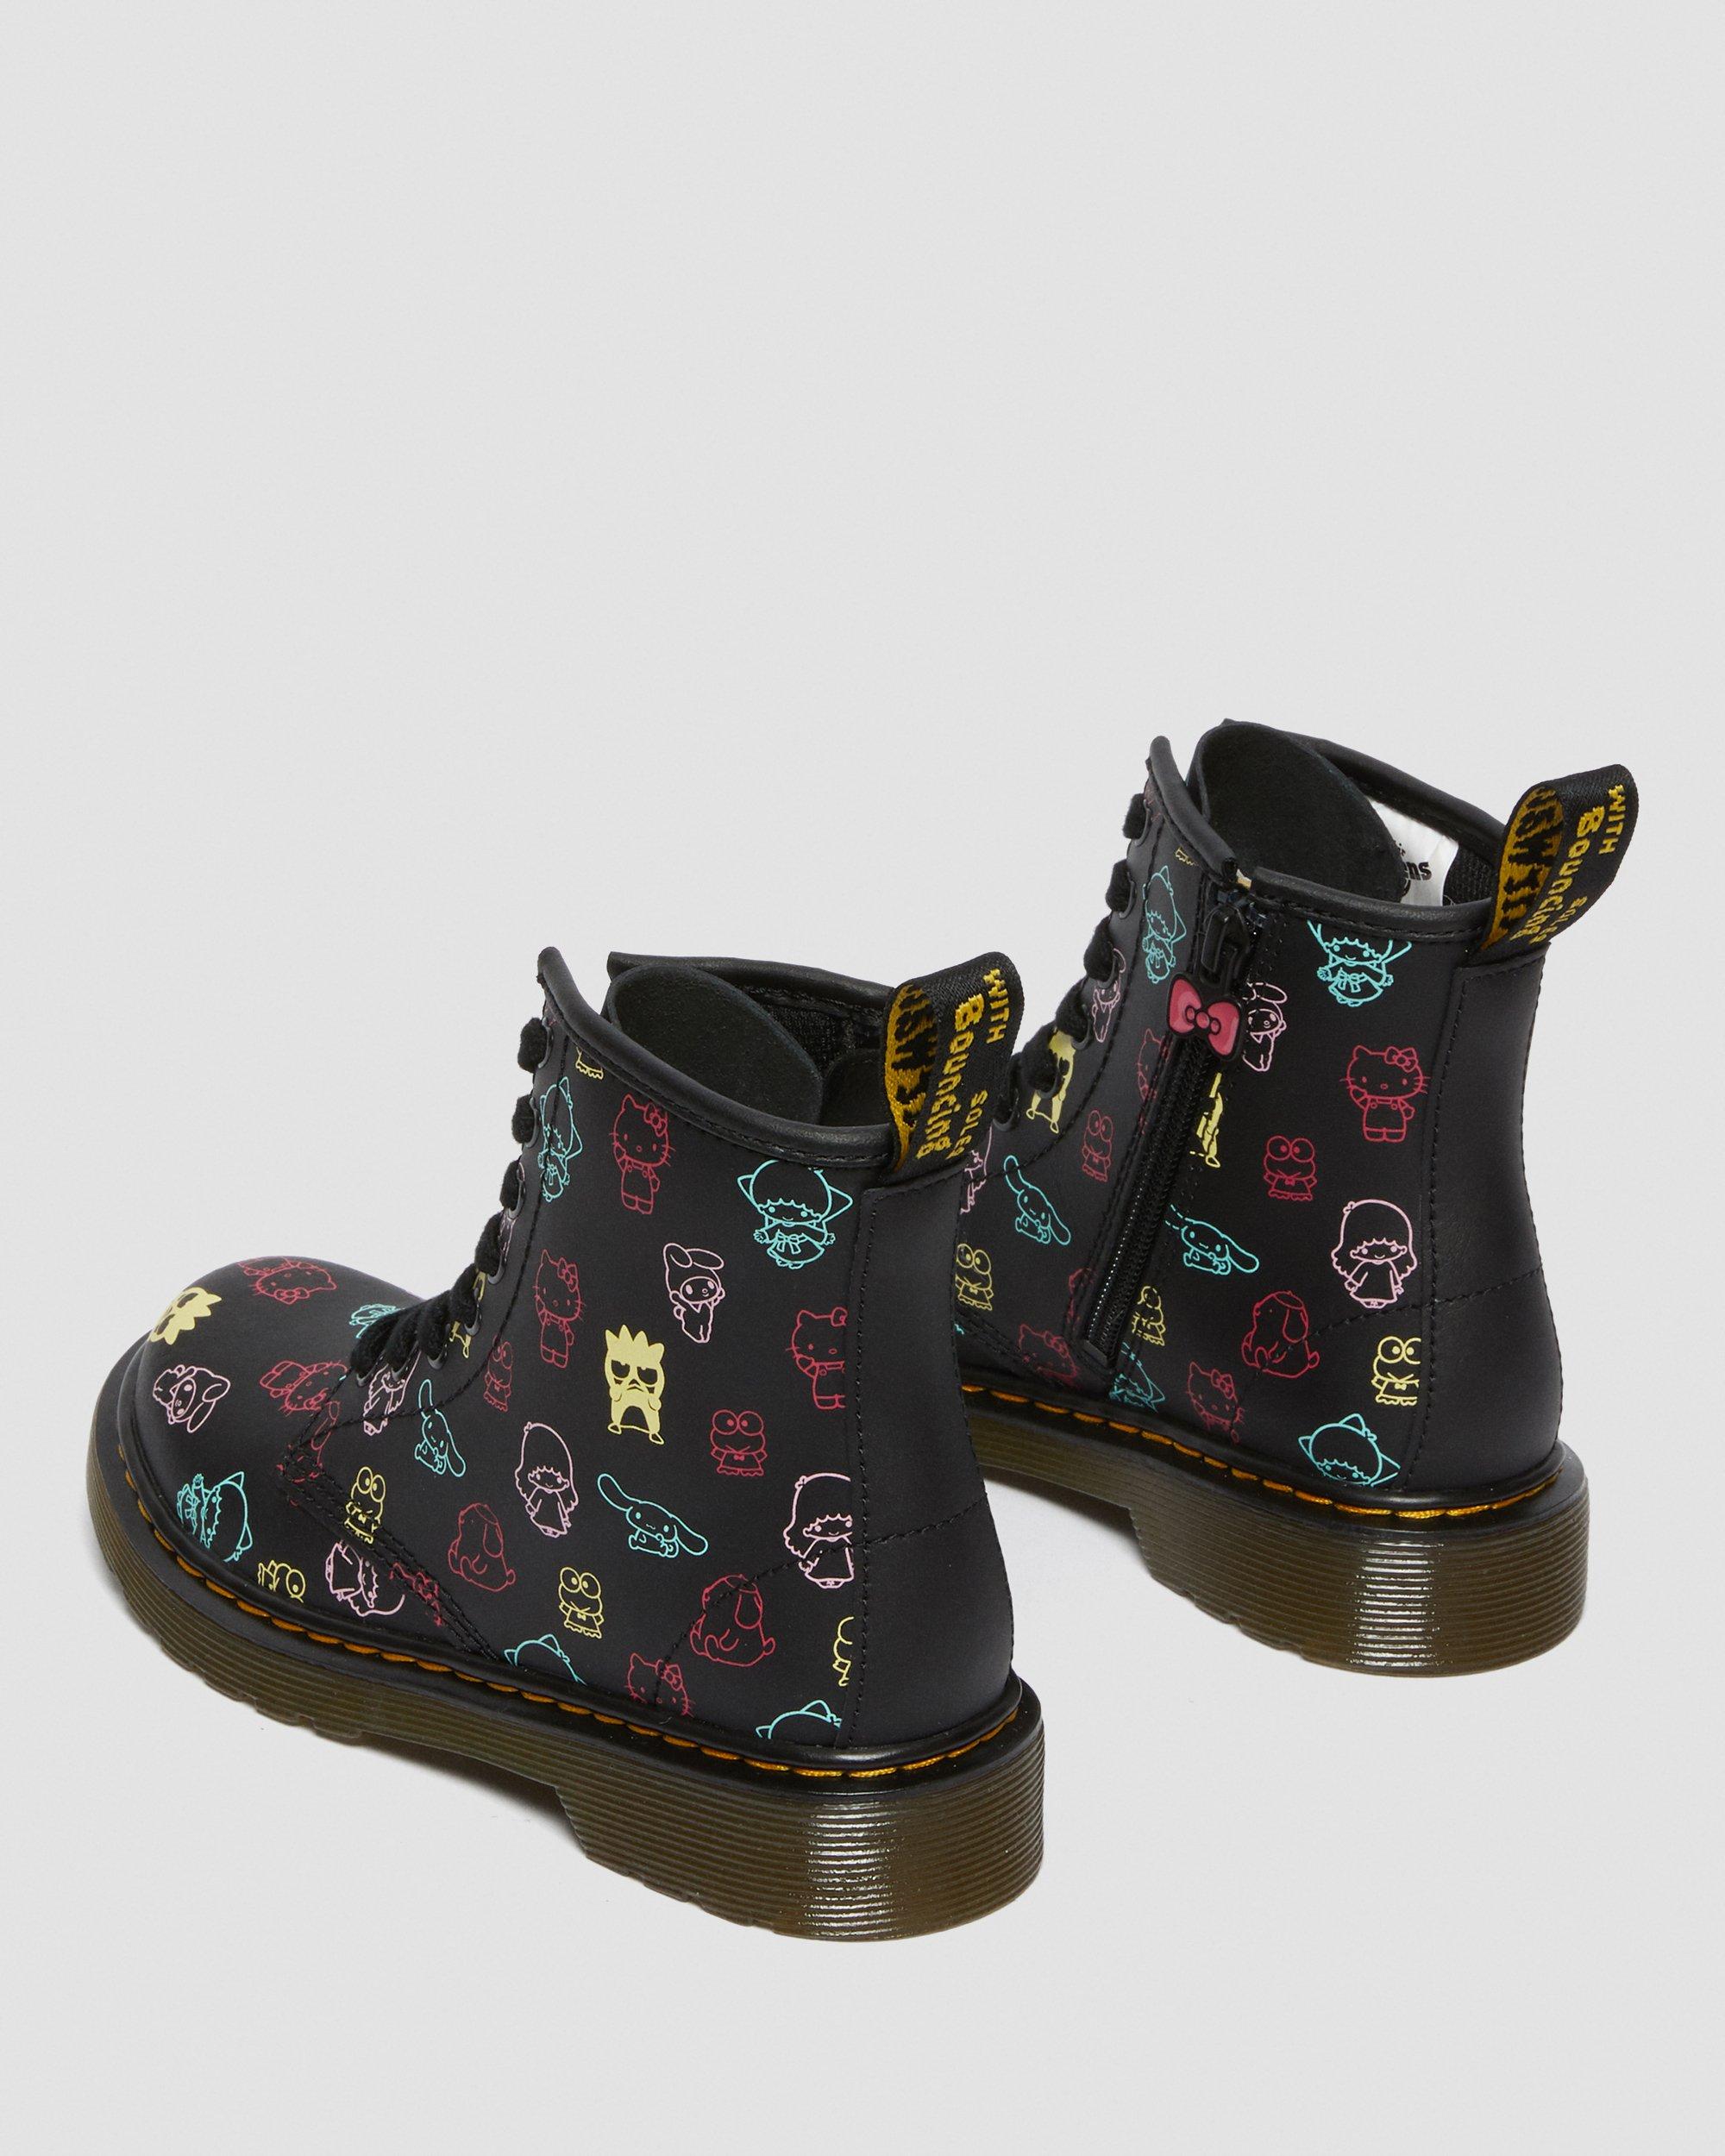 https://i1.adis.ws/i/drmartens/26842001.89.jpg?$large$Junior Hello Kitty & Friends 1460 Leather Lace Up Boots Dr. Martens